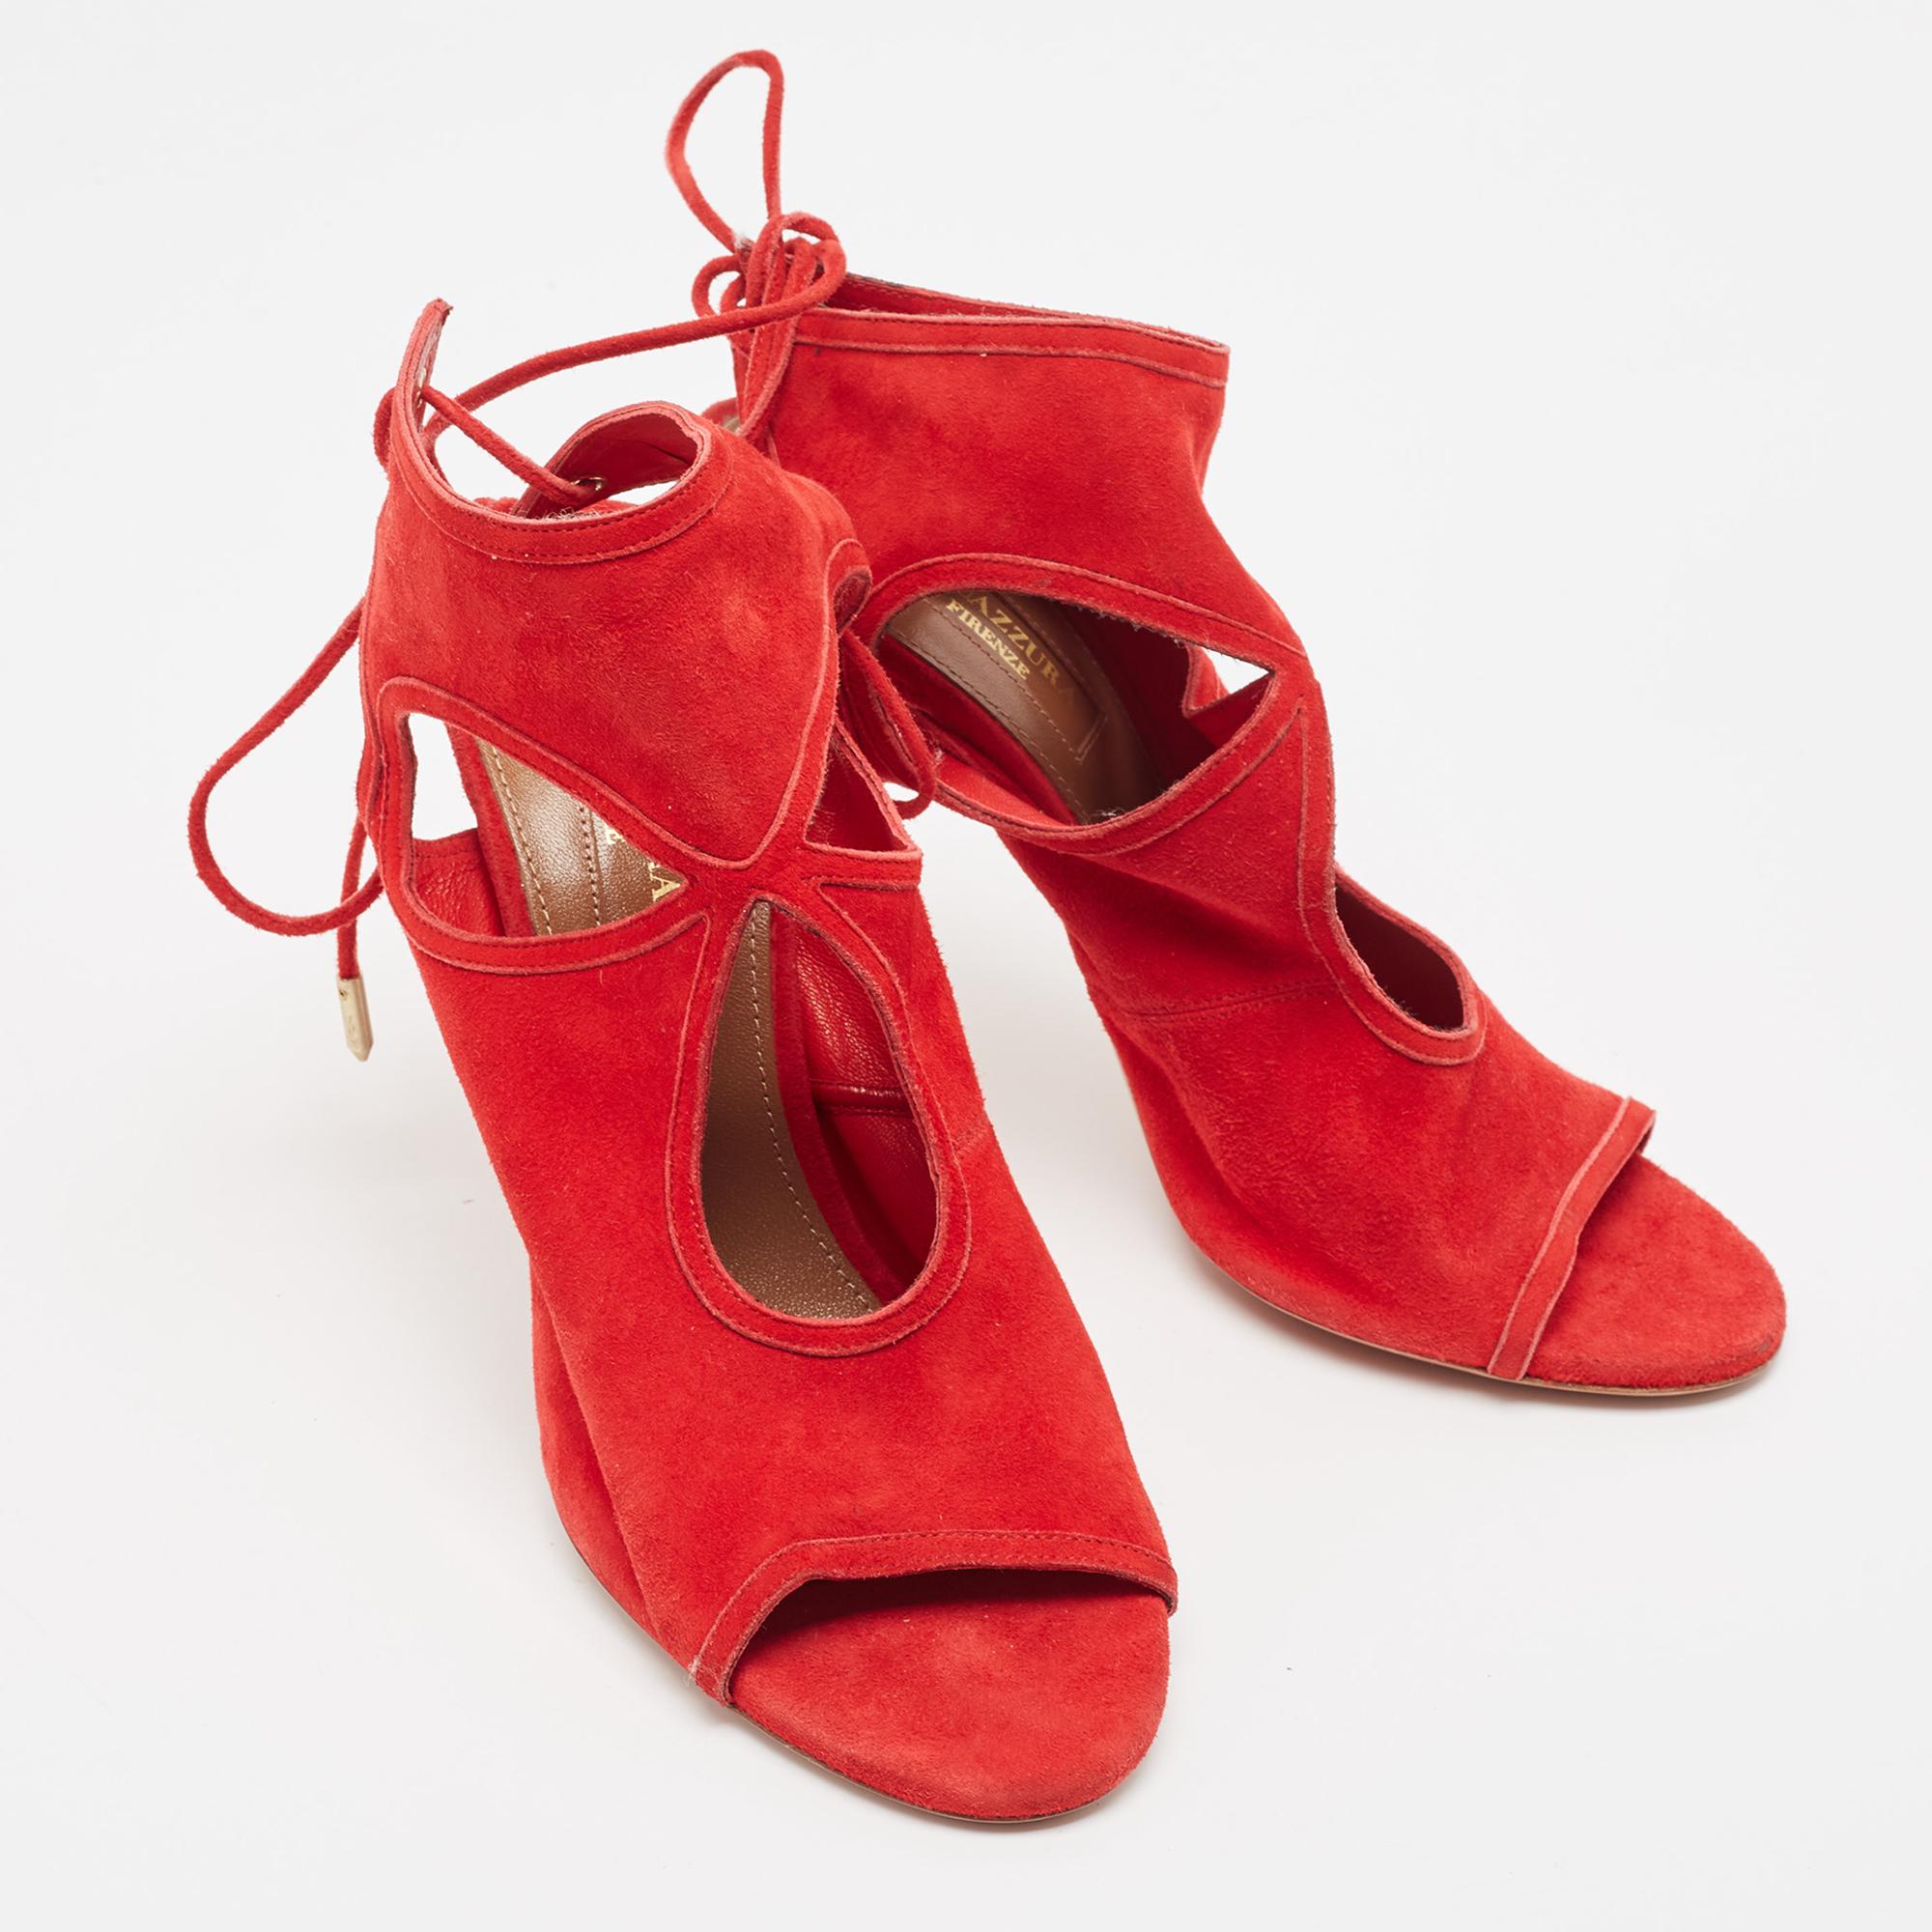 Aquazzura Red Suede Sexy Thing Ankle Strap Sandals Size 37 1